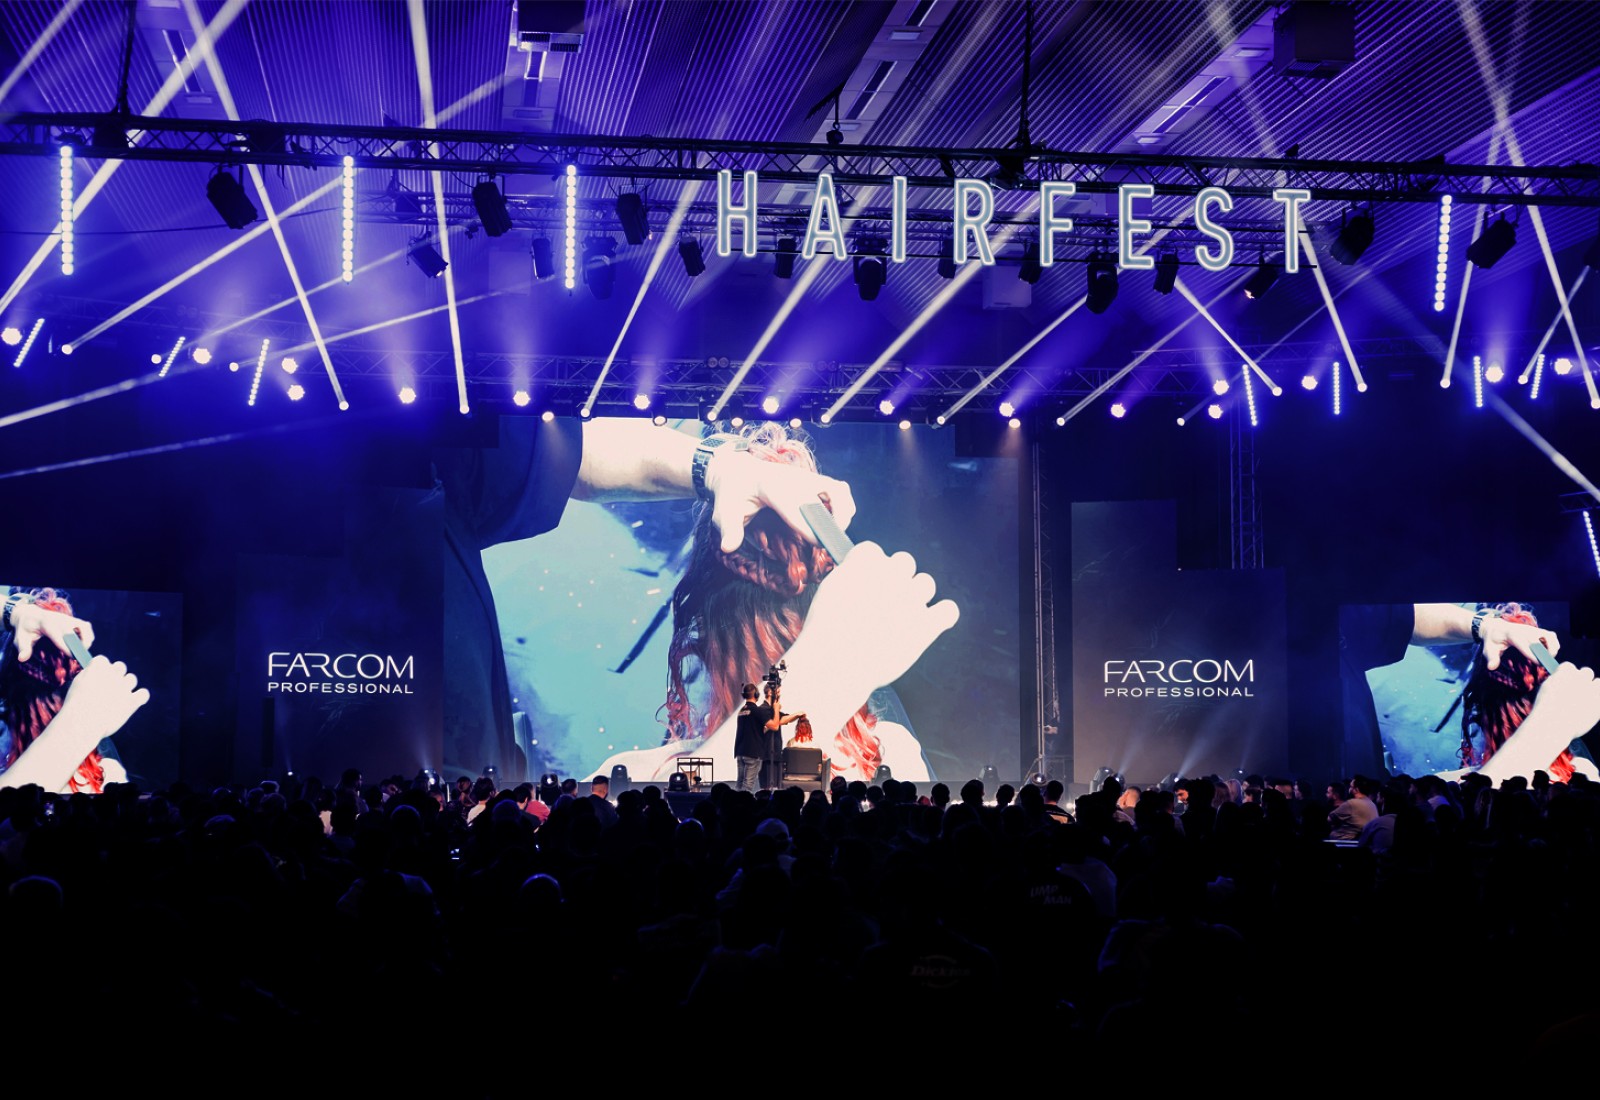 FARCOM PROFESSIONAL Grand Sponsor  of HAIRFEST EXPERIENCE 2023,  the largest hairdressing & barbering training festival